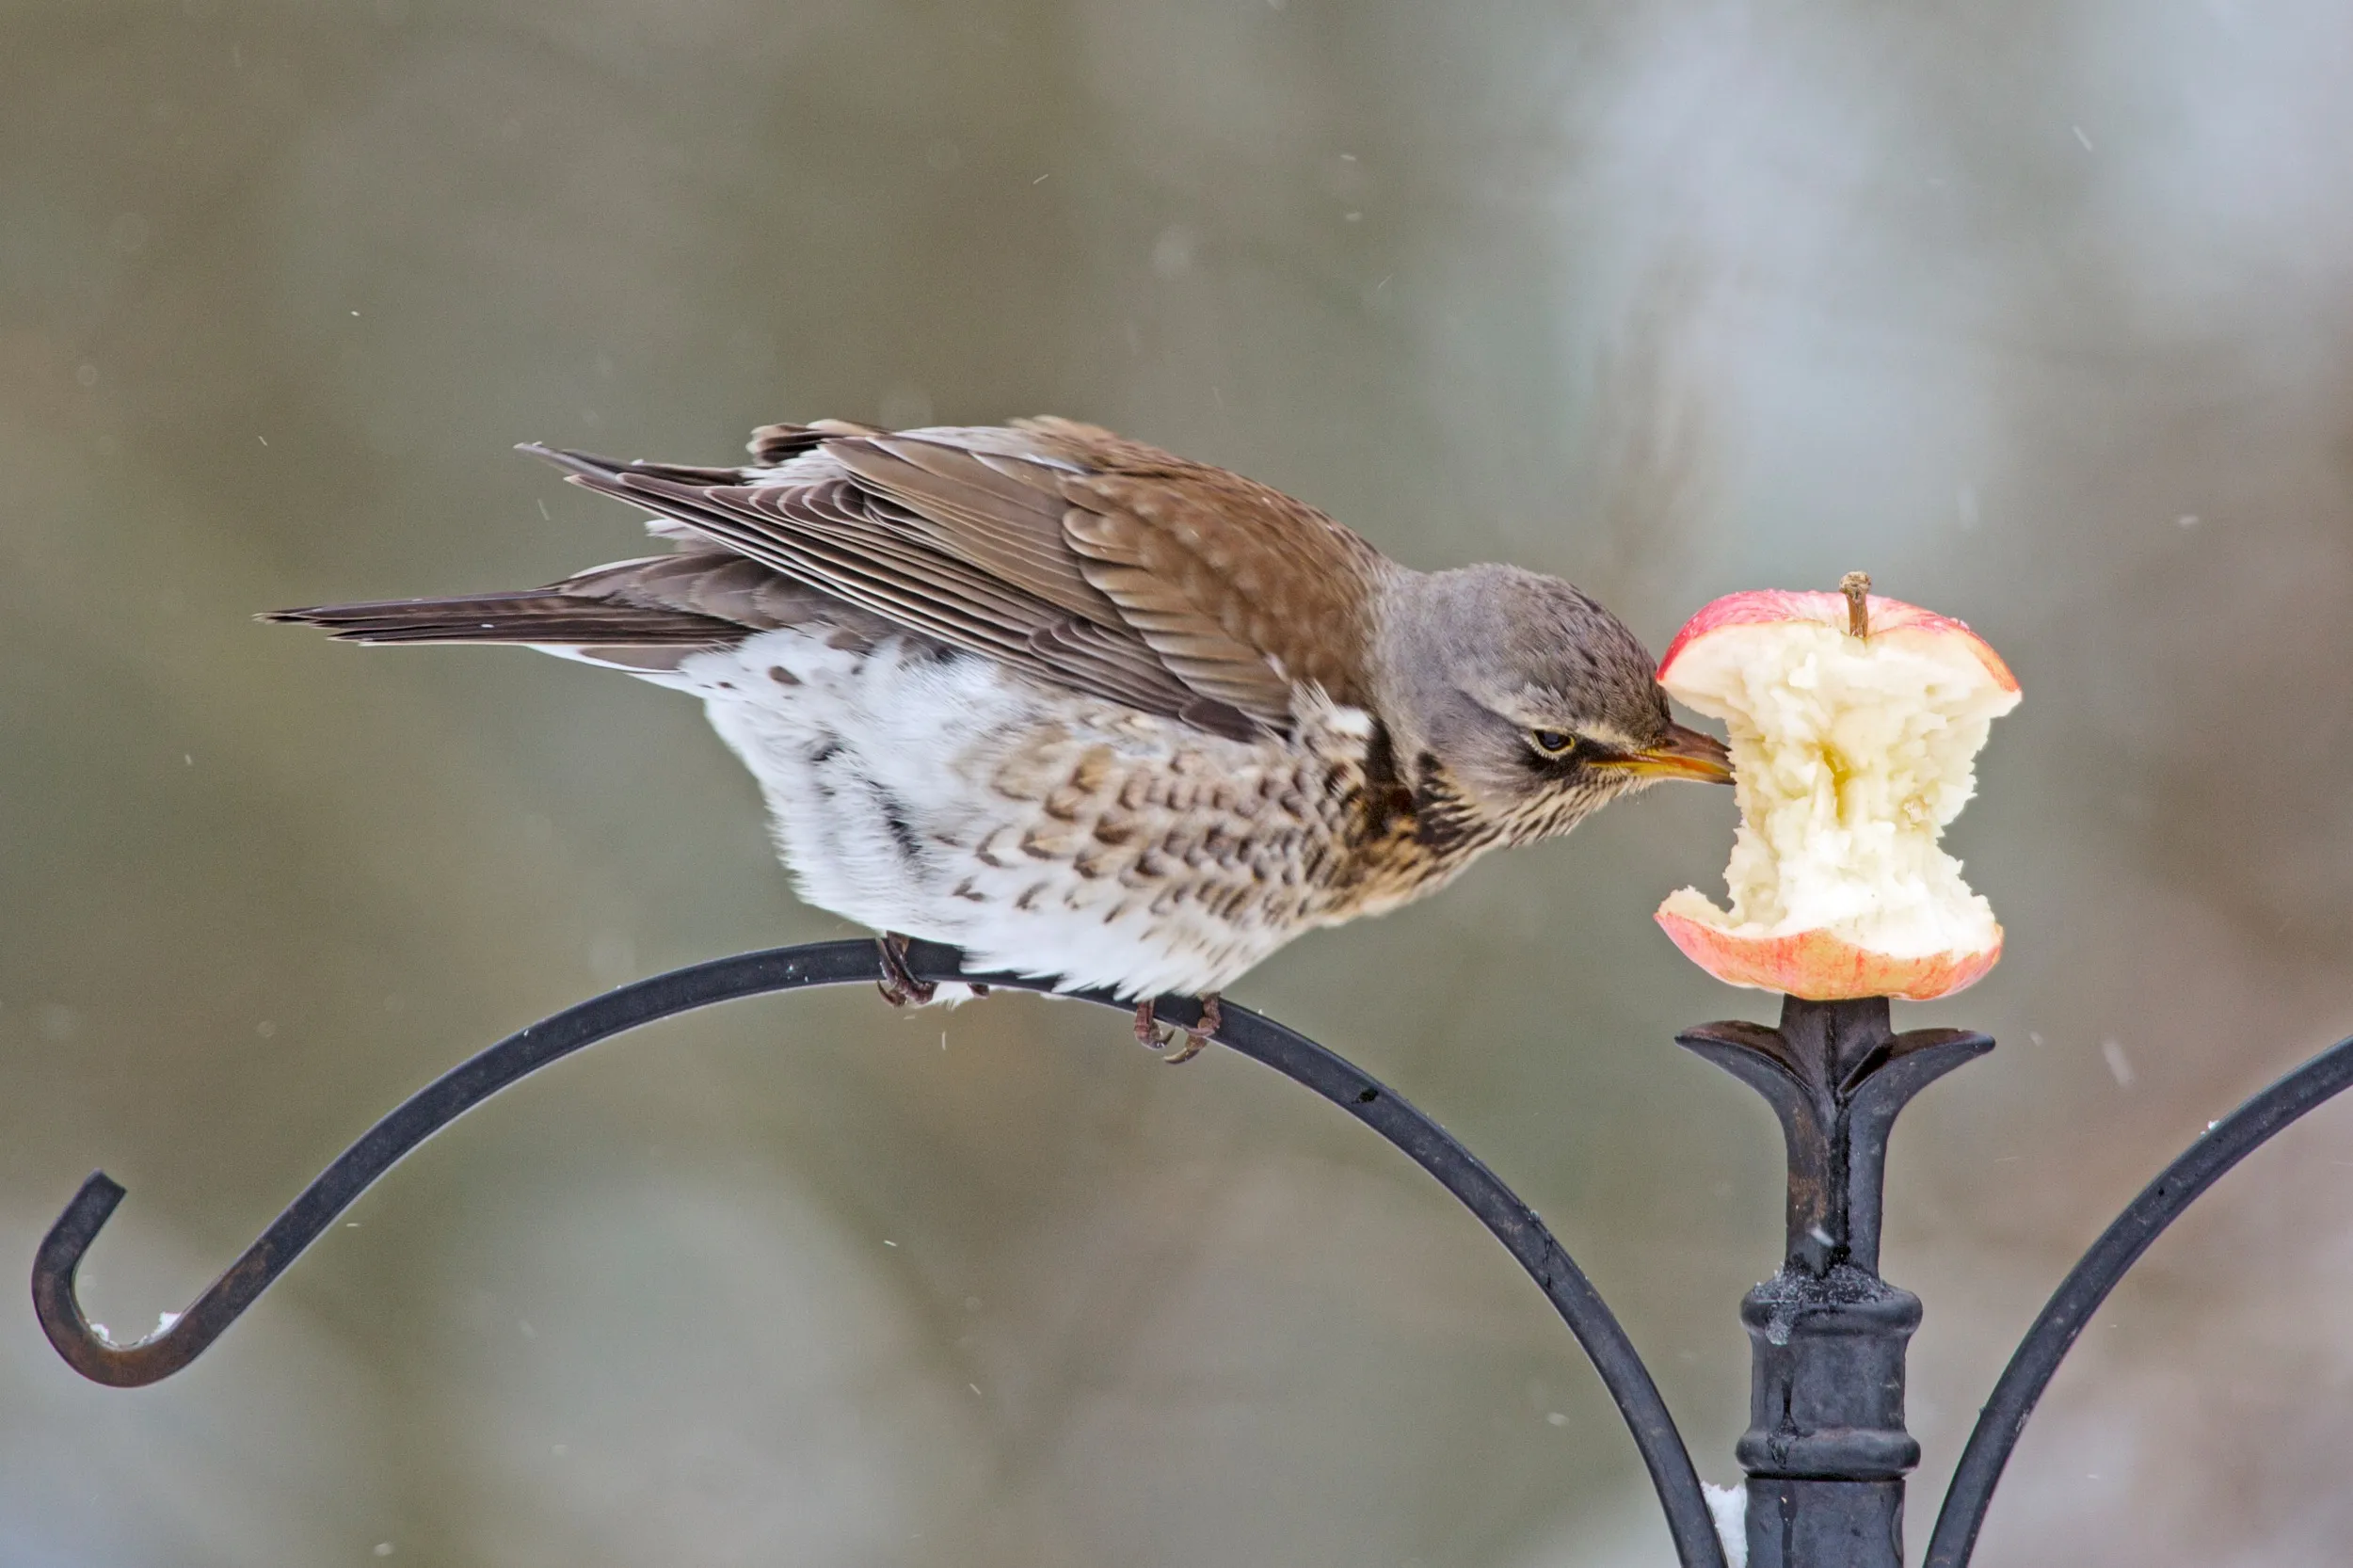 A Fieldfare in the snow, perched on an iron birdfeeder stand and pecking at an apple.